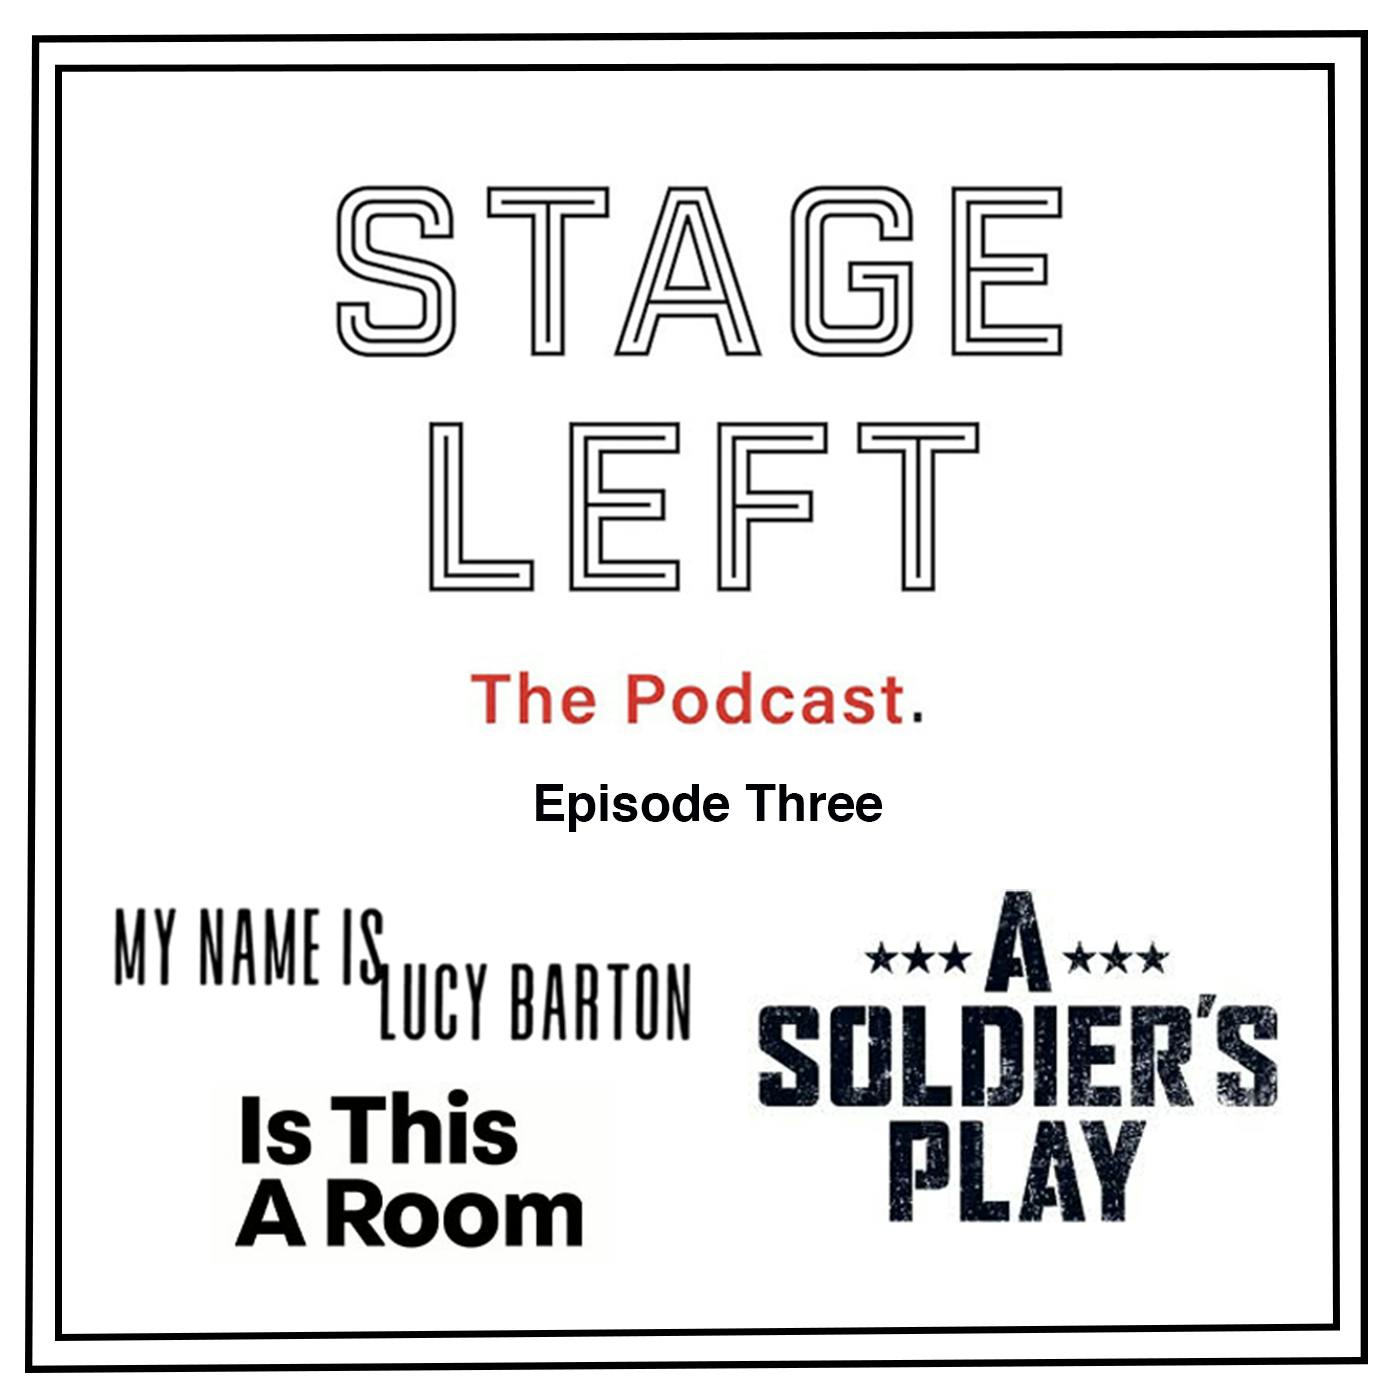 Episode 3: My Name Is Lucy Barton, Is This A Room, and A Soldier’s Play